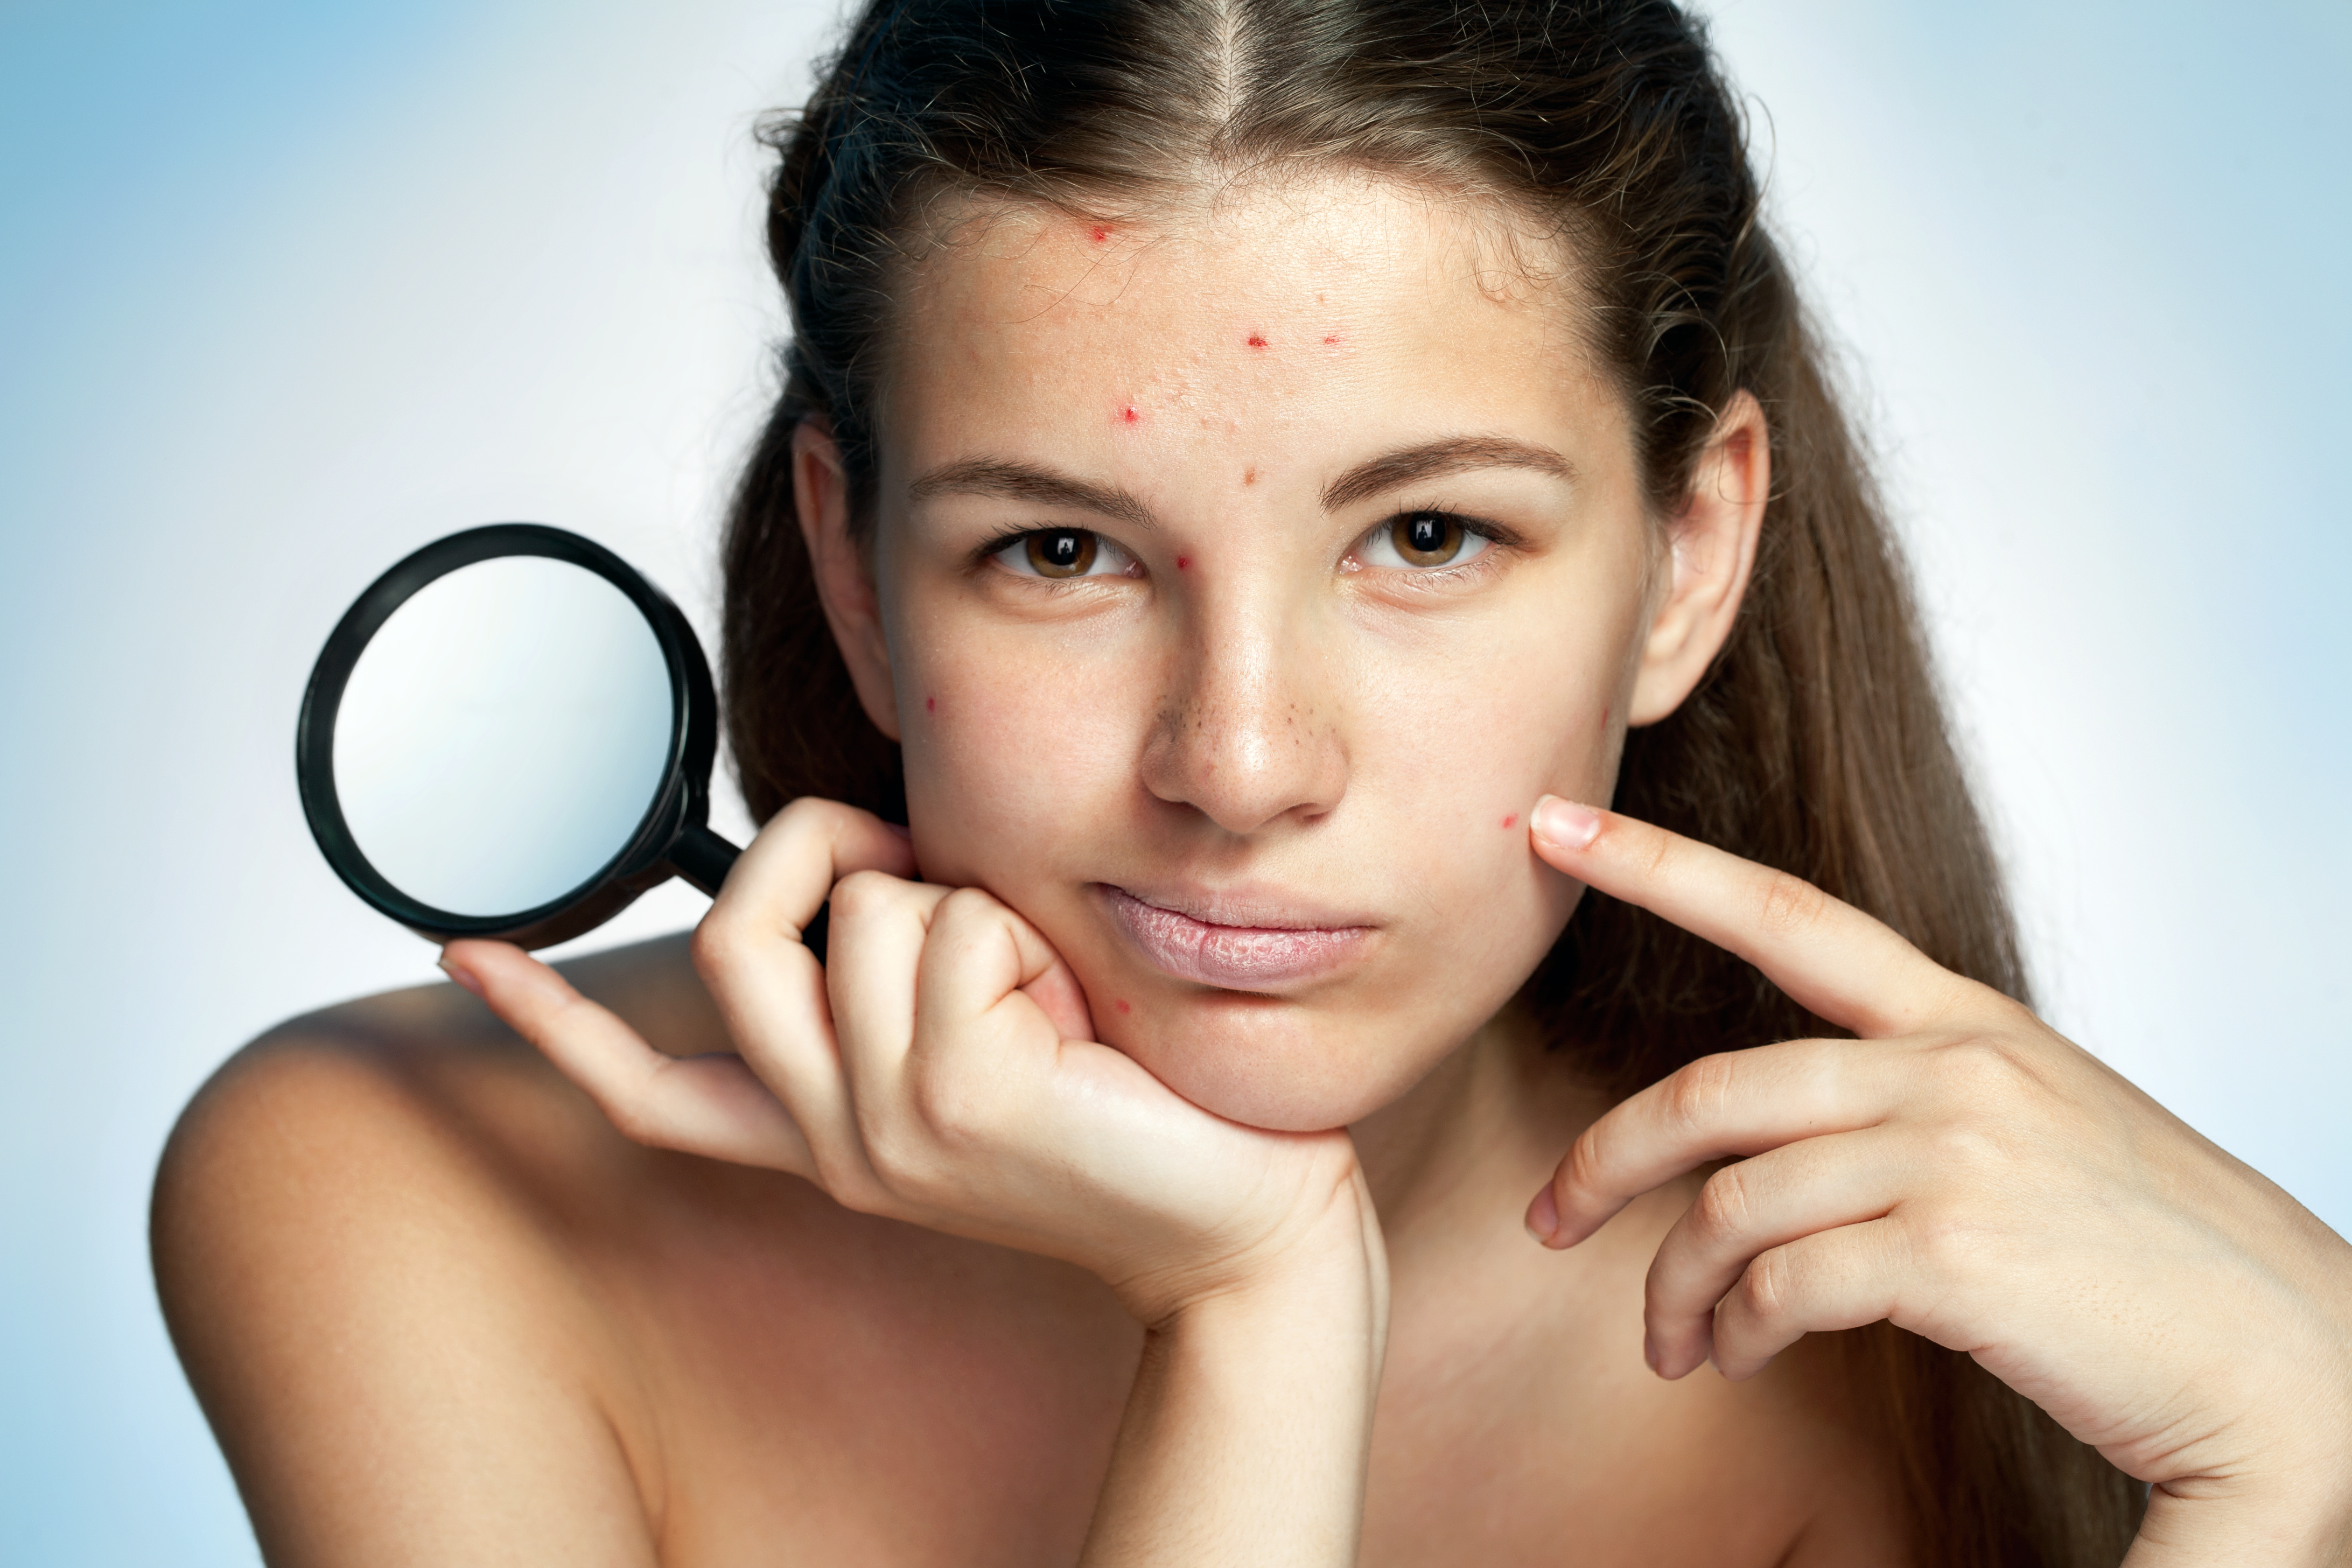 Teen girl with problem skin, pimple, magnifying glass.